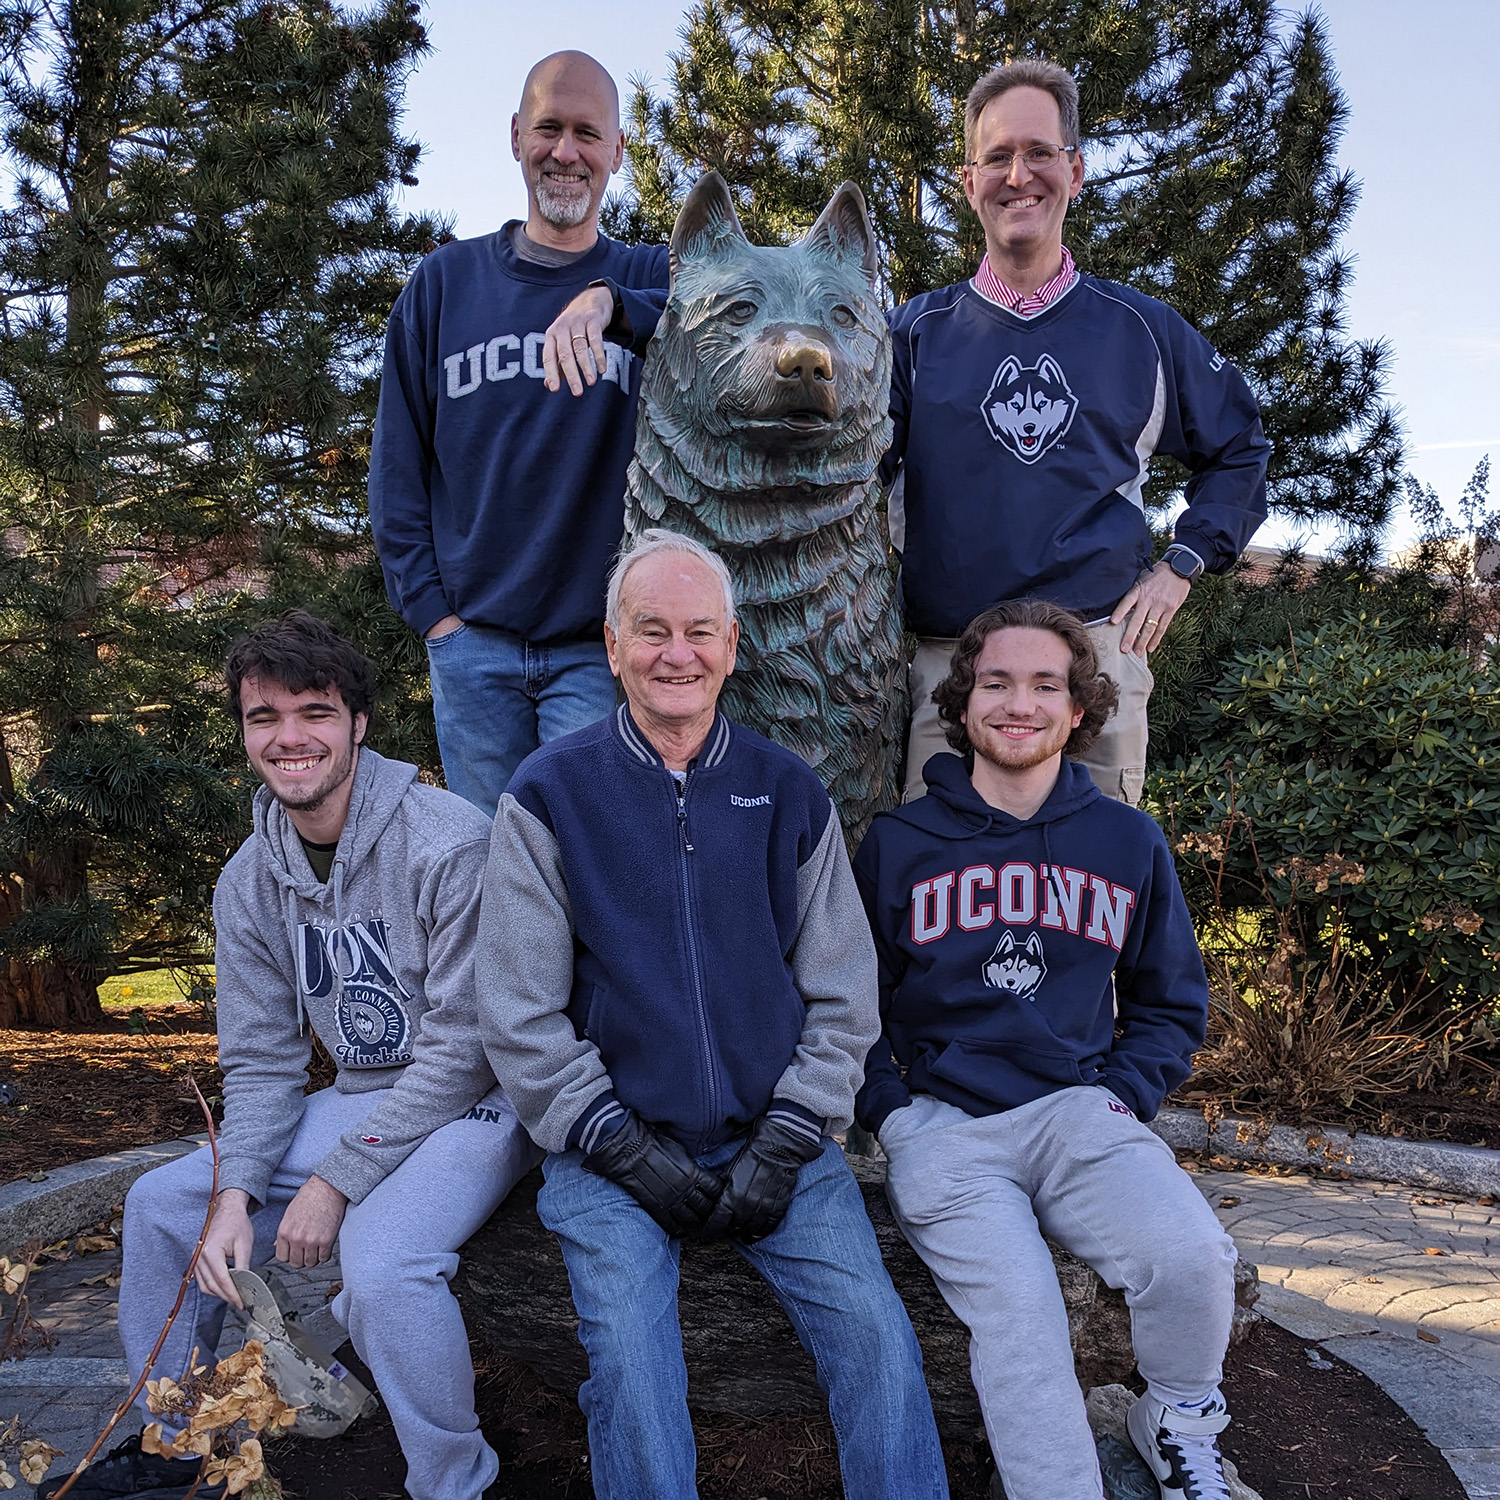 Nelson King of Dayville, Connecticut, sons Kevin King of Plainville, Connecticut, and Tracy King of Halfmoon, New York; and grandsons Zachary King and Robert King pose wearing UConn sweaters pose with the Jonathan statue at UConn Storrs campus.